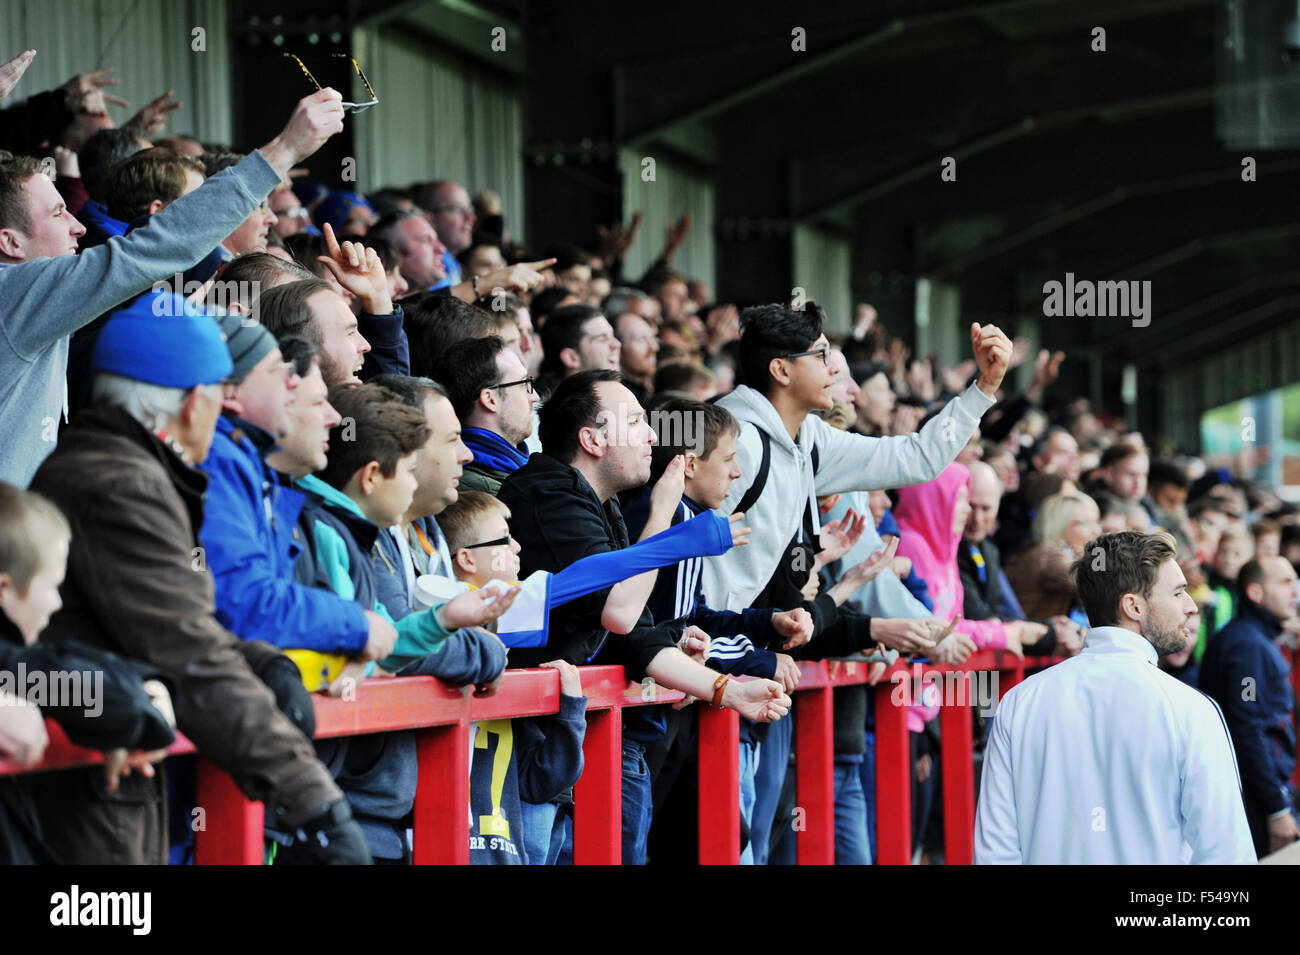 Football fans jeering and making gestures at a referees decision during football match Stock Photo